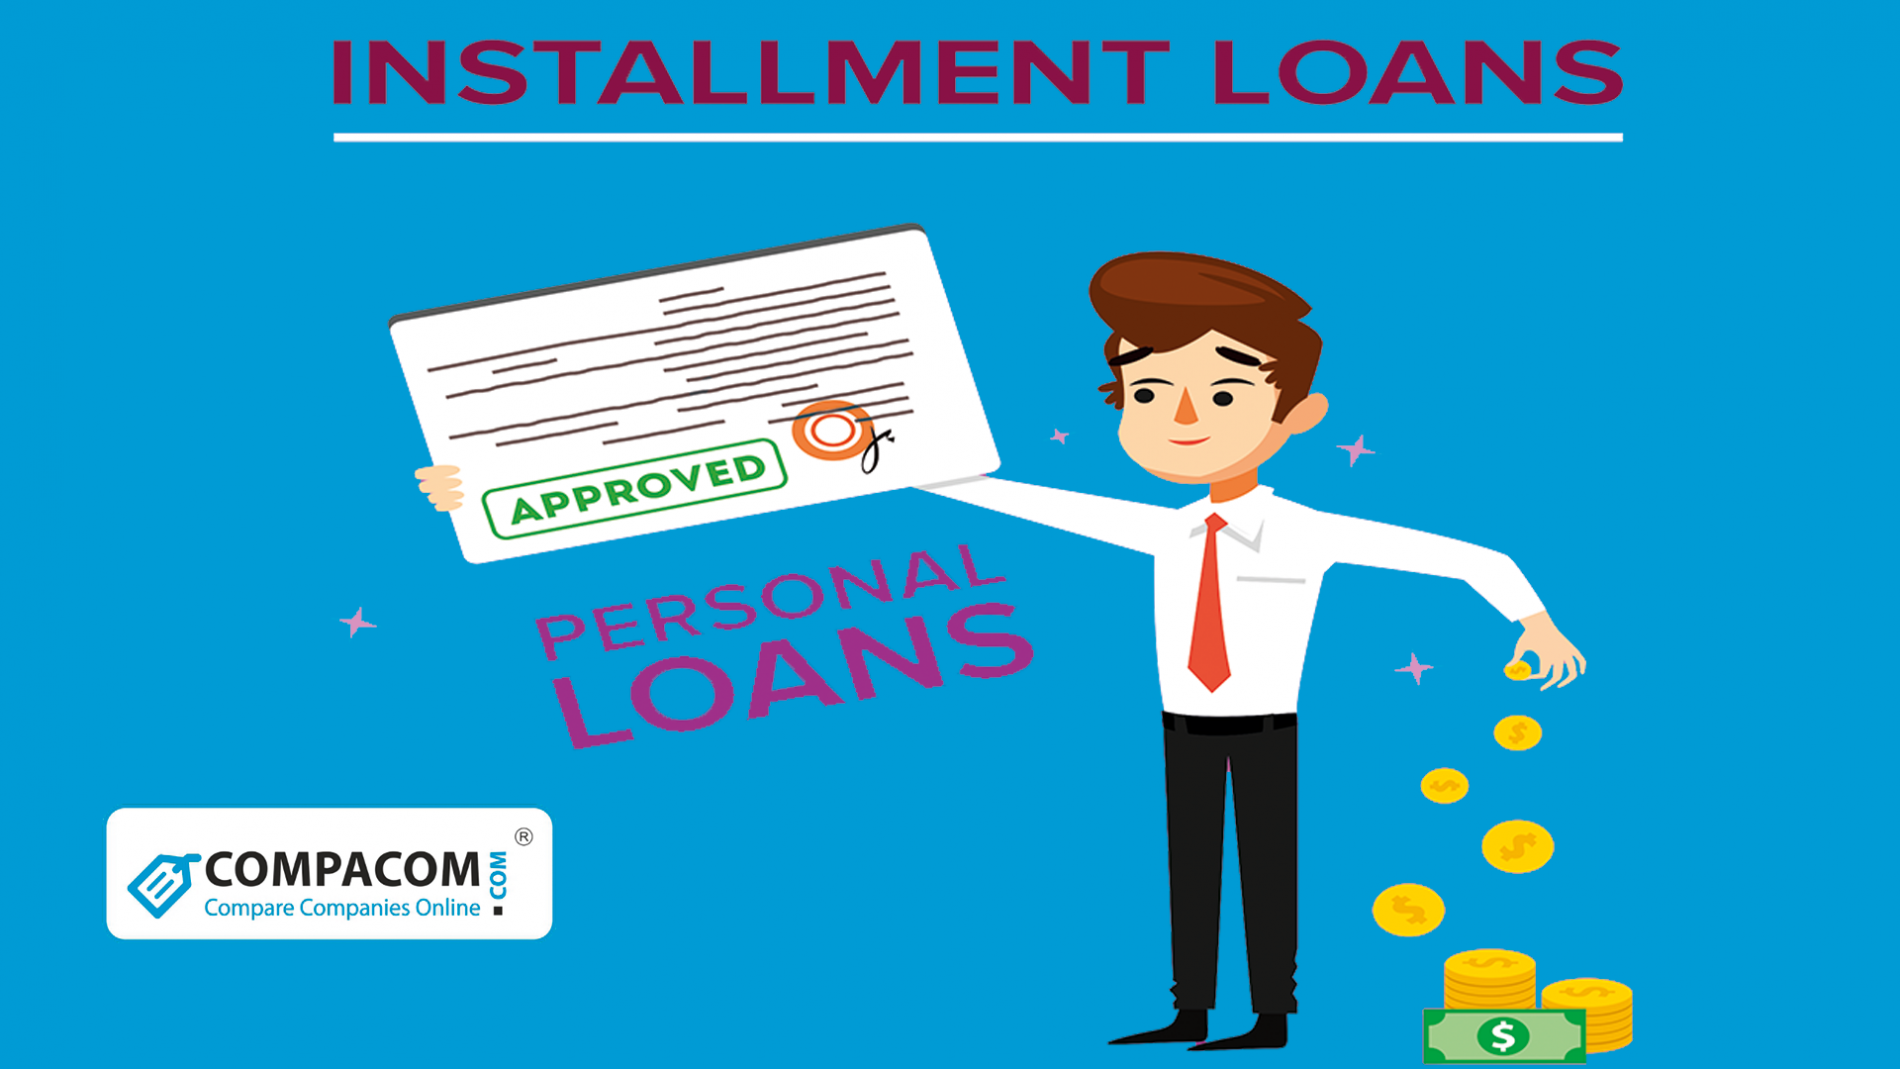 installment loans from direct lenders available for bad credit with